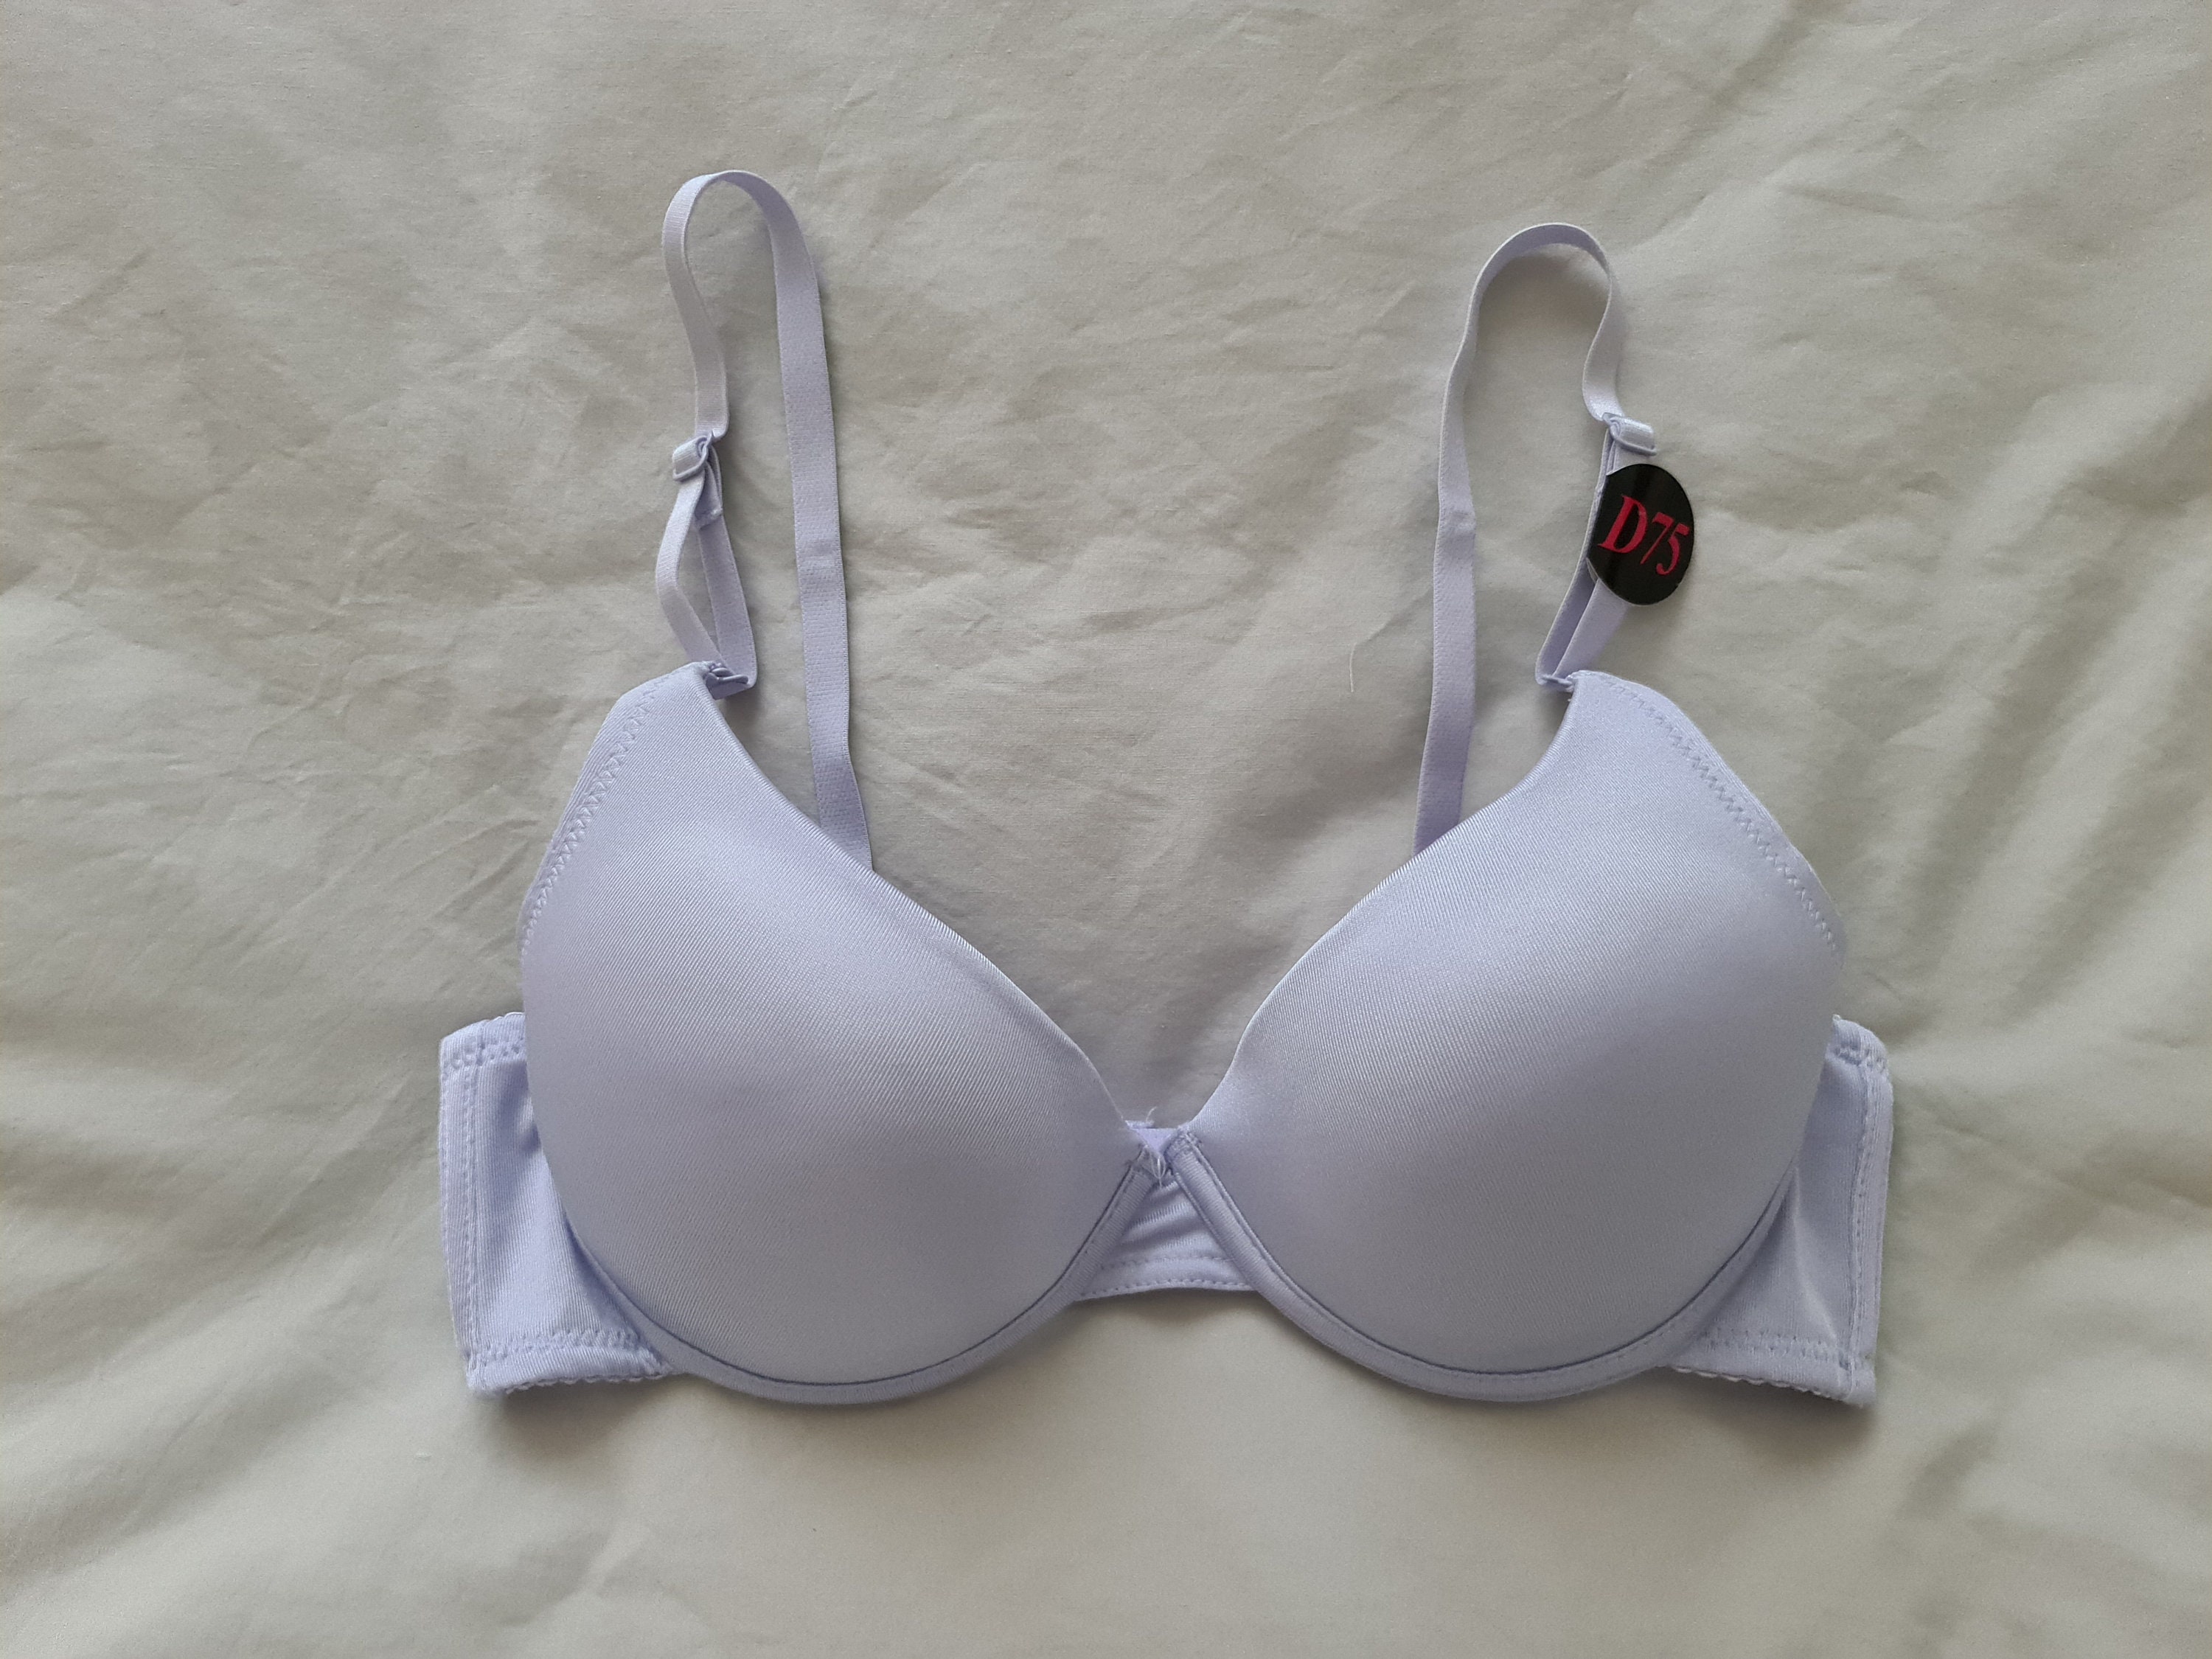 Vintage New Old Stock Bra From Japan size 12B Aus & 34B UK/US, Japan D75 